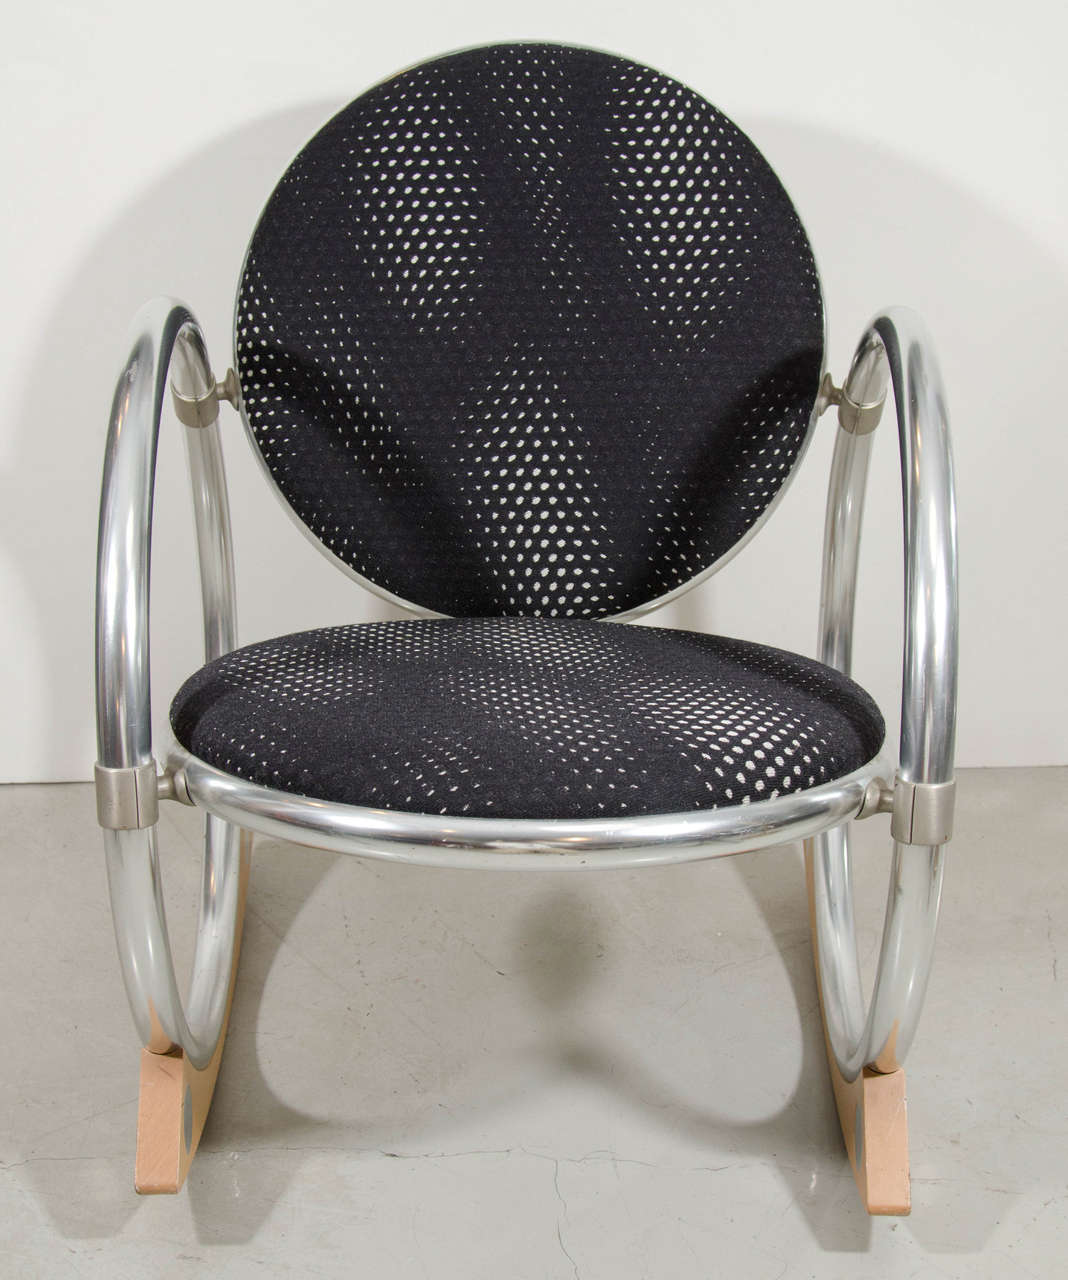 A Dondolo rocking chair, designed in 1994 by Verner Panton for Ycami Edizioni/Italy, tubular aluminium, upholstered seat and back, fabric covering.